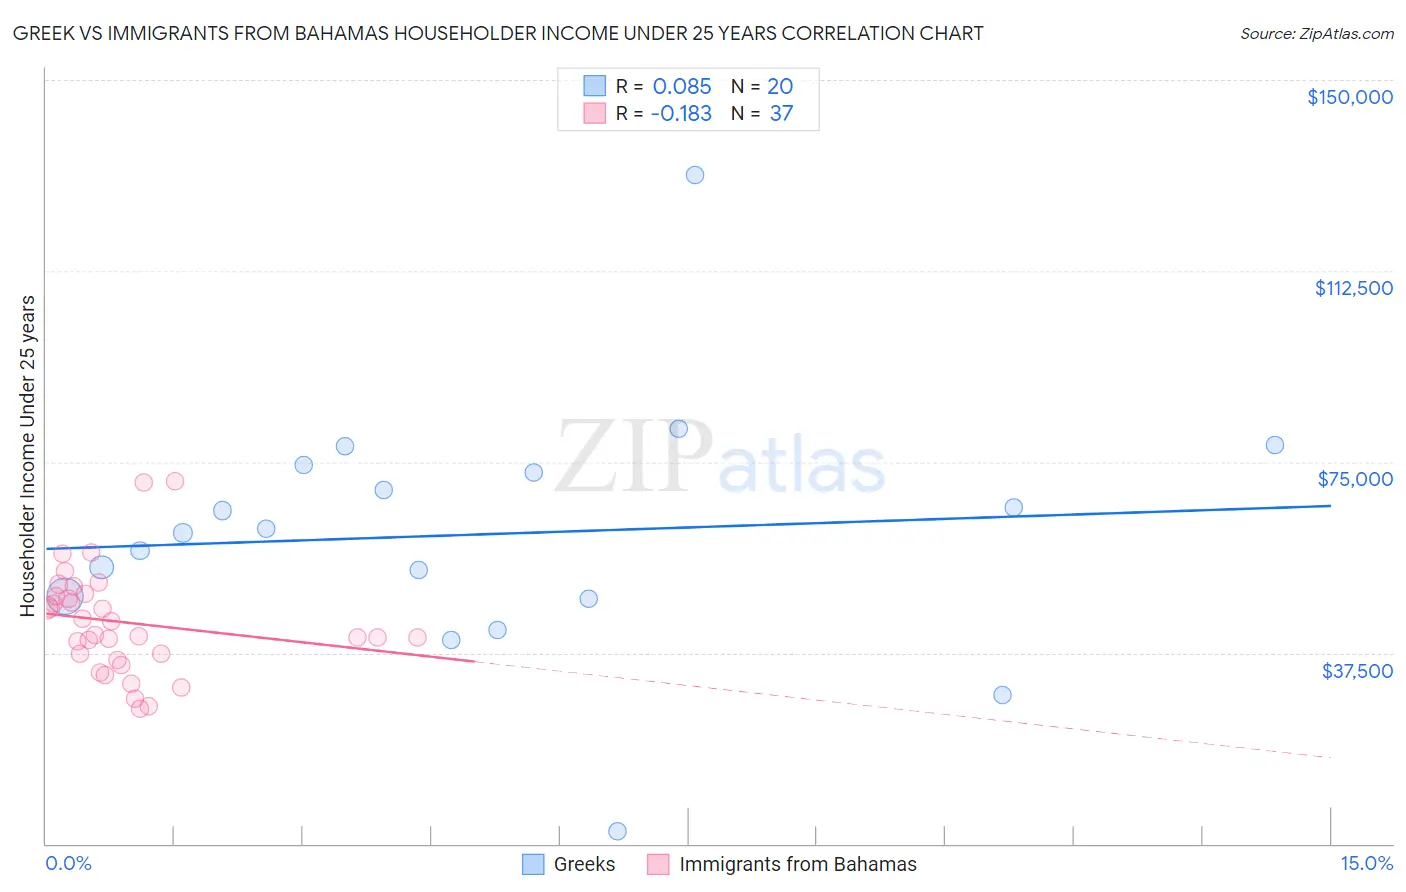 Greek vs Immigrants from Bahamas Householder Income Under 25 years